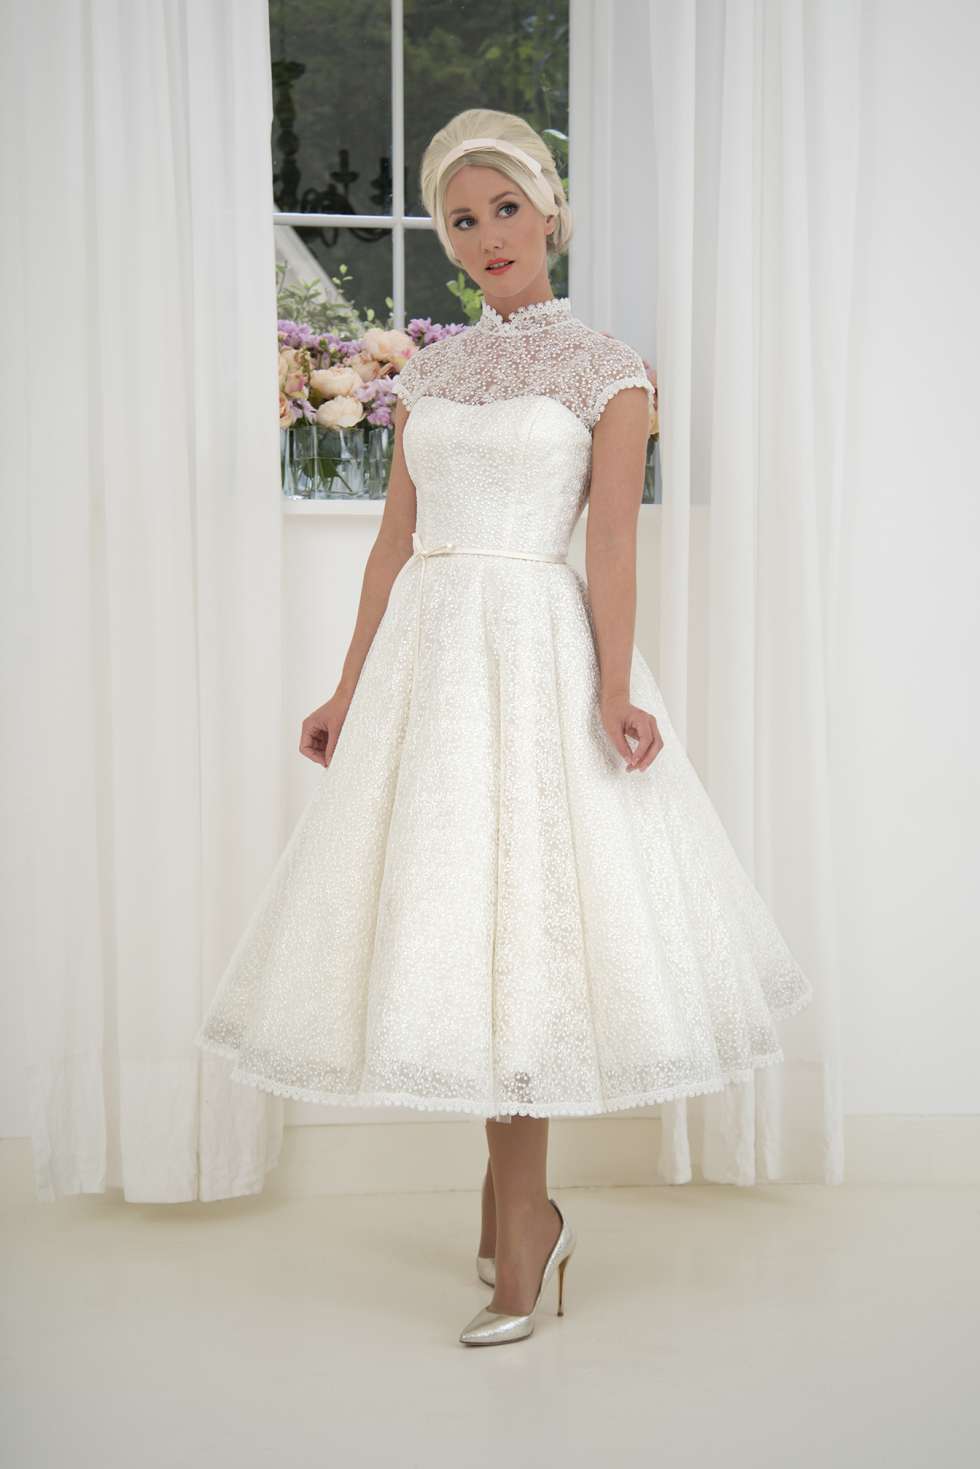 The 2019 Wedding Dress Collection by House of Mooshki